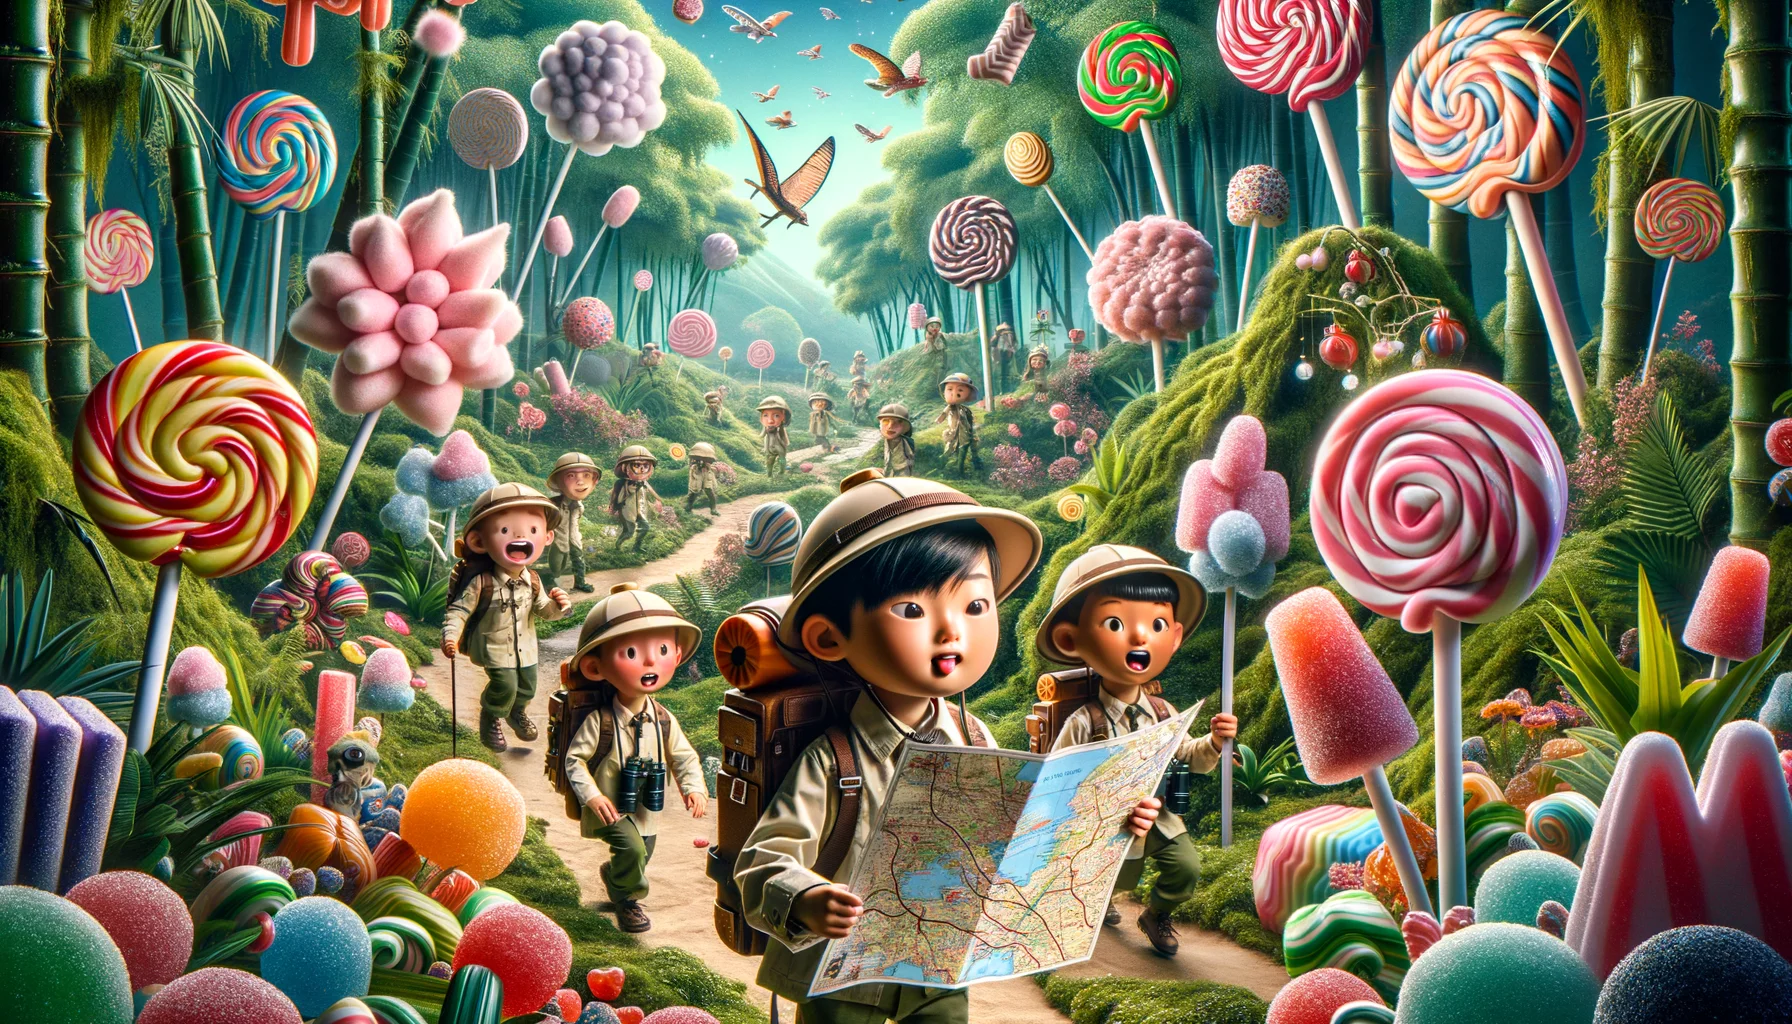 Generate a humorous image incorporating a wild, unusual candy hunt. Picture a multinational group of eager children dressed as explorers - complete with safari hats, binoculars and backpacks - in a lush, fantastical jungle filled with candy canes for bamboo shoots, lollipop flowers, and cotton candy clouds. A Asian boy at the front holds a map charting a route through this charmingly surreal candy landscape. Falling out of his overstuffed backpack are candies from around the globe; Turkish delight, Mexican dulces, Japanese wagashi, Russian zefir and many more. Visualize this scenario as realistic, yet with a light-hearted twist.